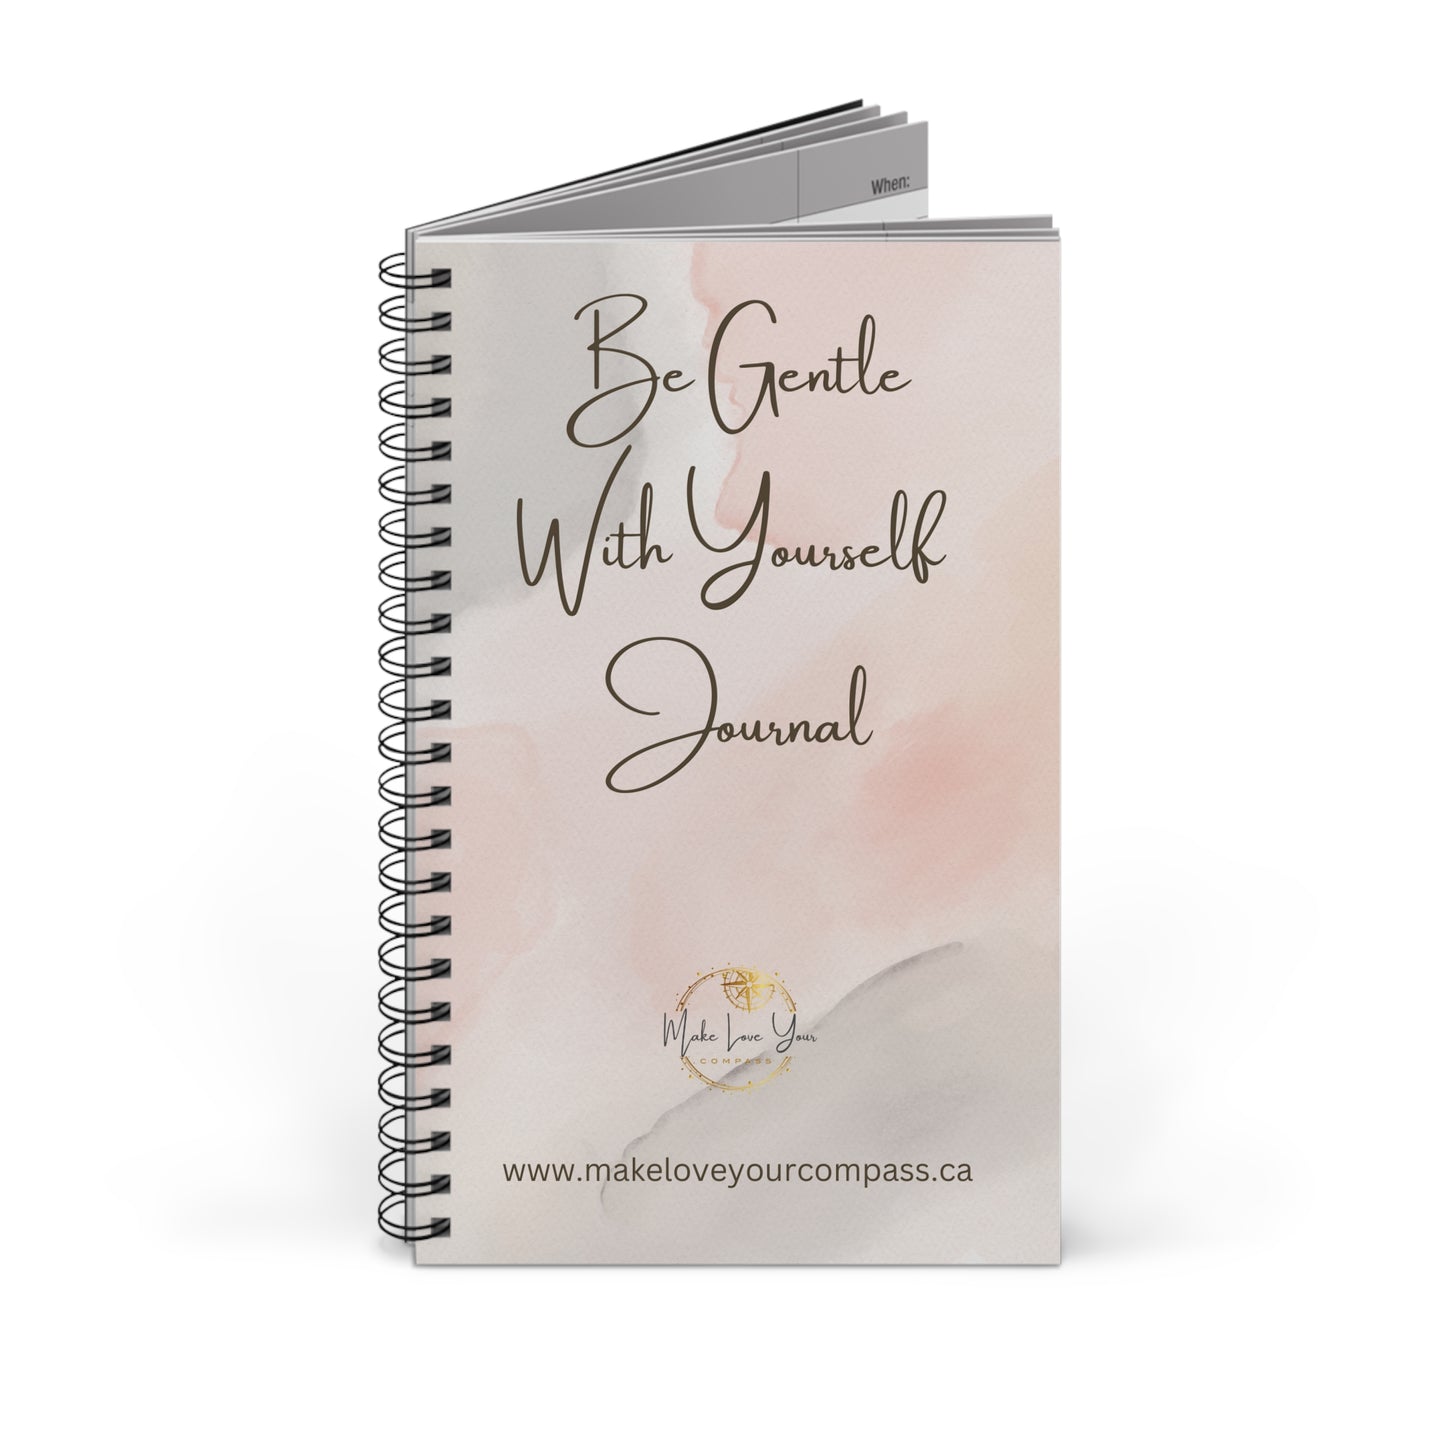 Be Gentle With Yourself Journal - Plus Bonuses